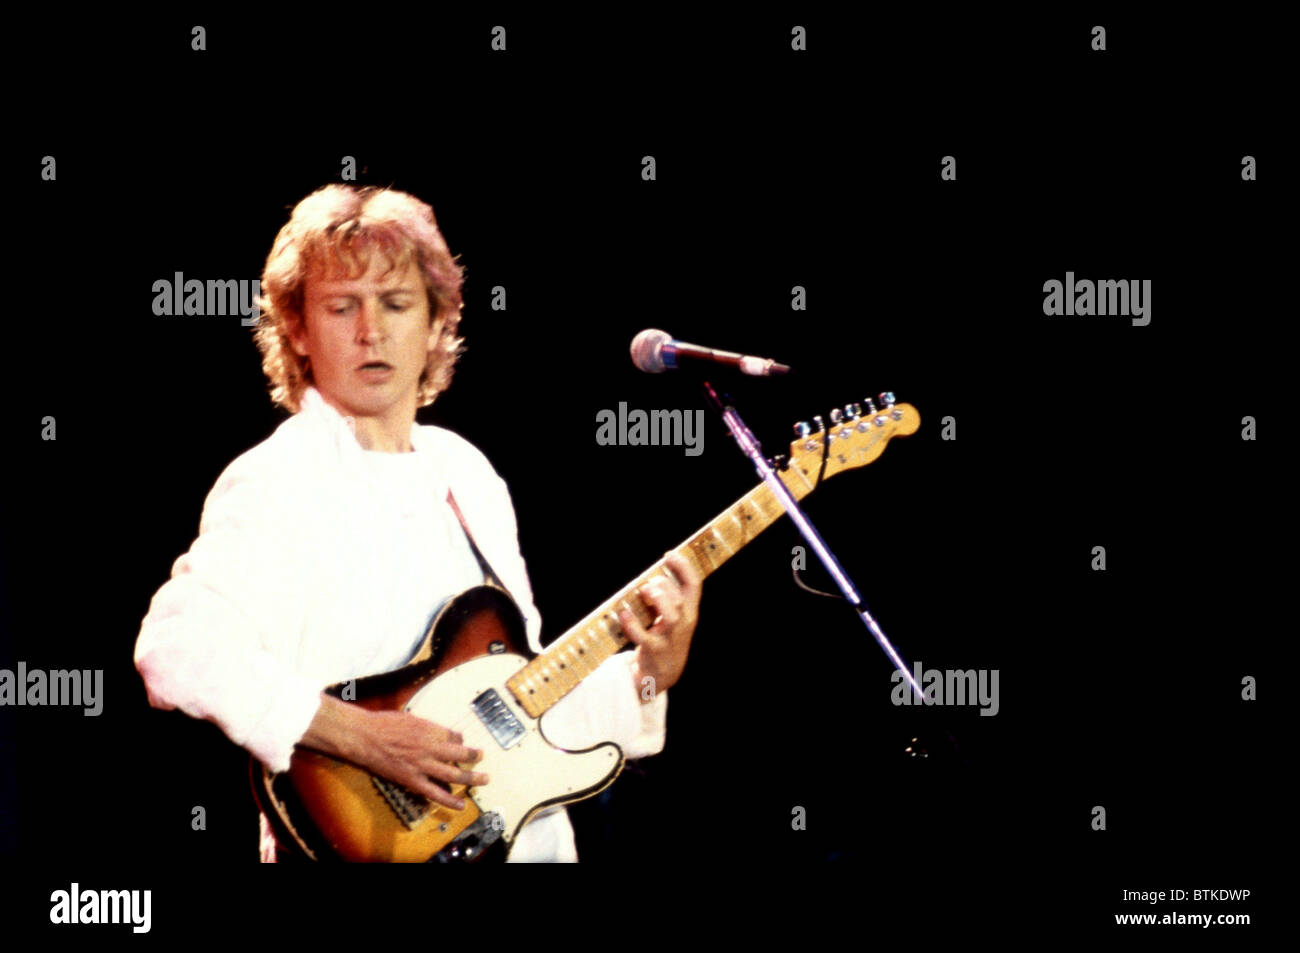 Andy Summers performing with the Police at the concert for  Amnesty International, Giant Stadium, New Jersey, June 15, 1986, Stock Photo